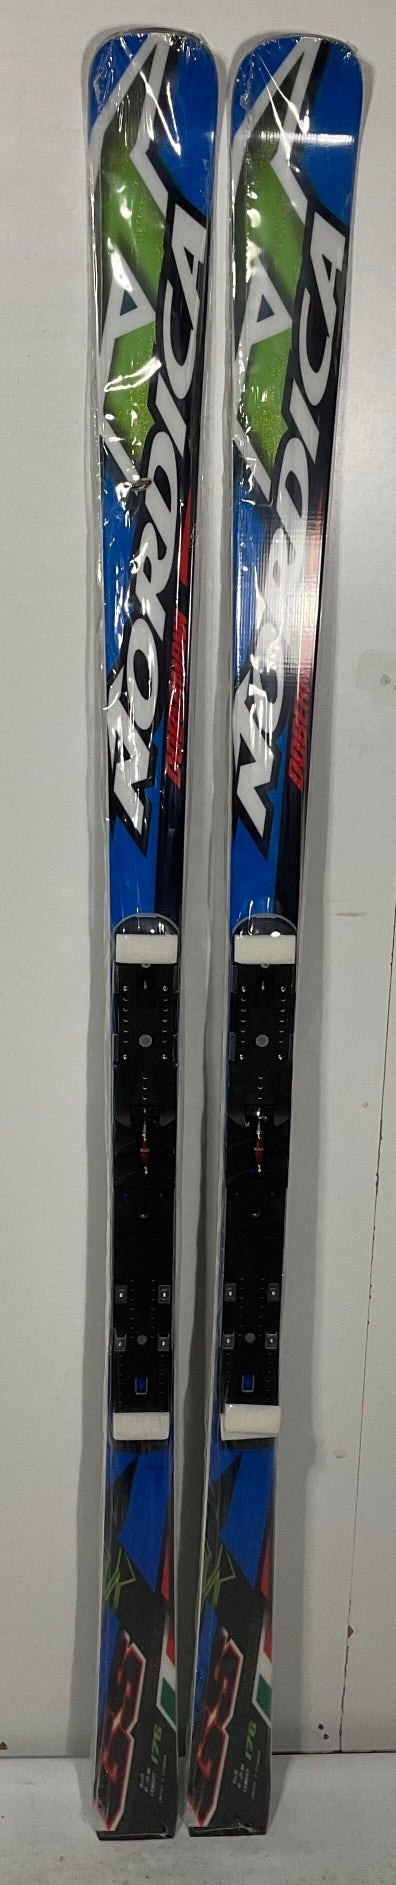 New Nordica 176cm Racing Dobermann GS WC Plate Skis Without Bindings